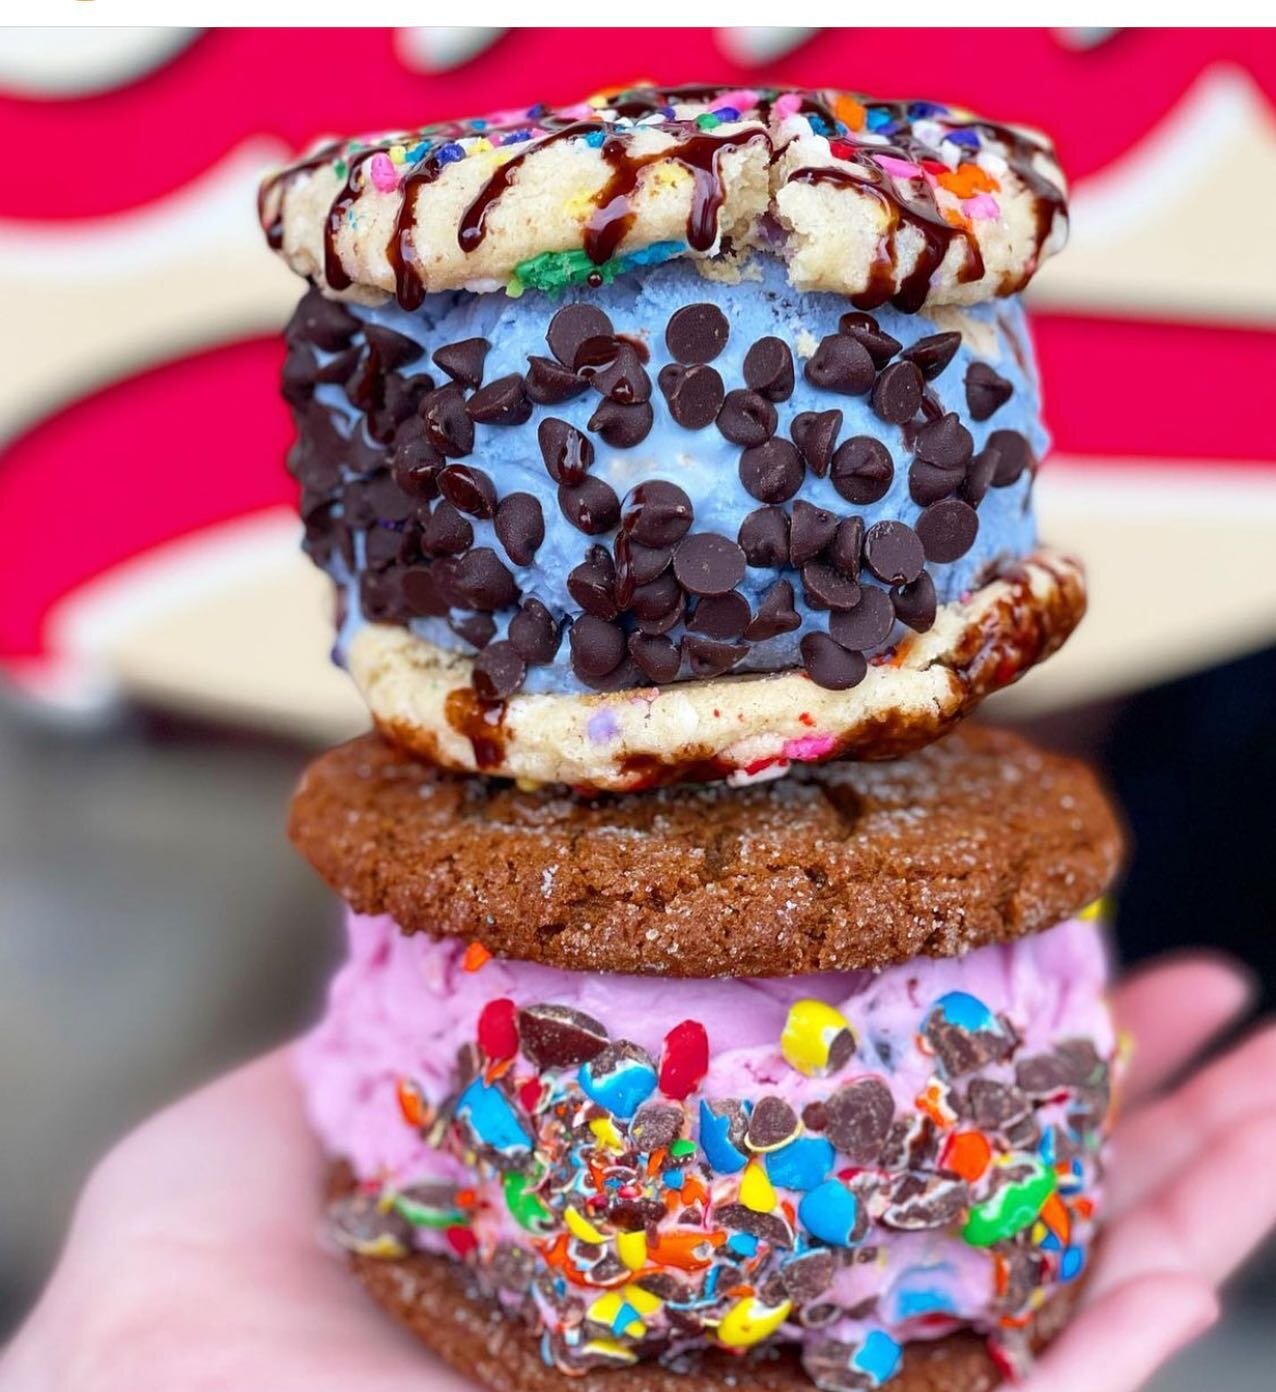 We admit it, there is something better than an ice cream cookie sandwich&hellip; TWO OF THEM! Great to see ya as always @eatswithjason! #doublestack #icecreamcookiesandwich #nelliesicecream